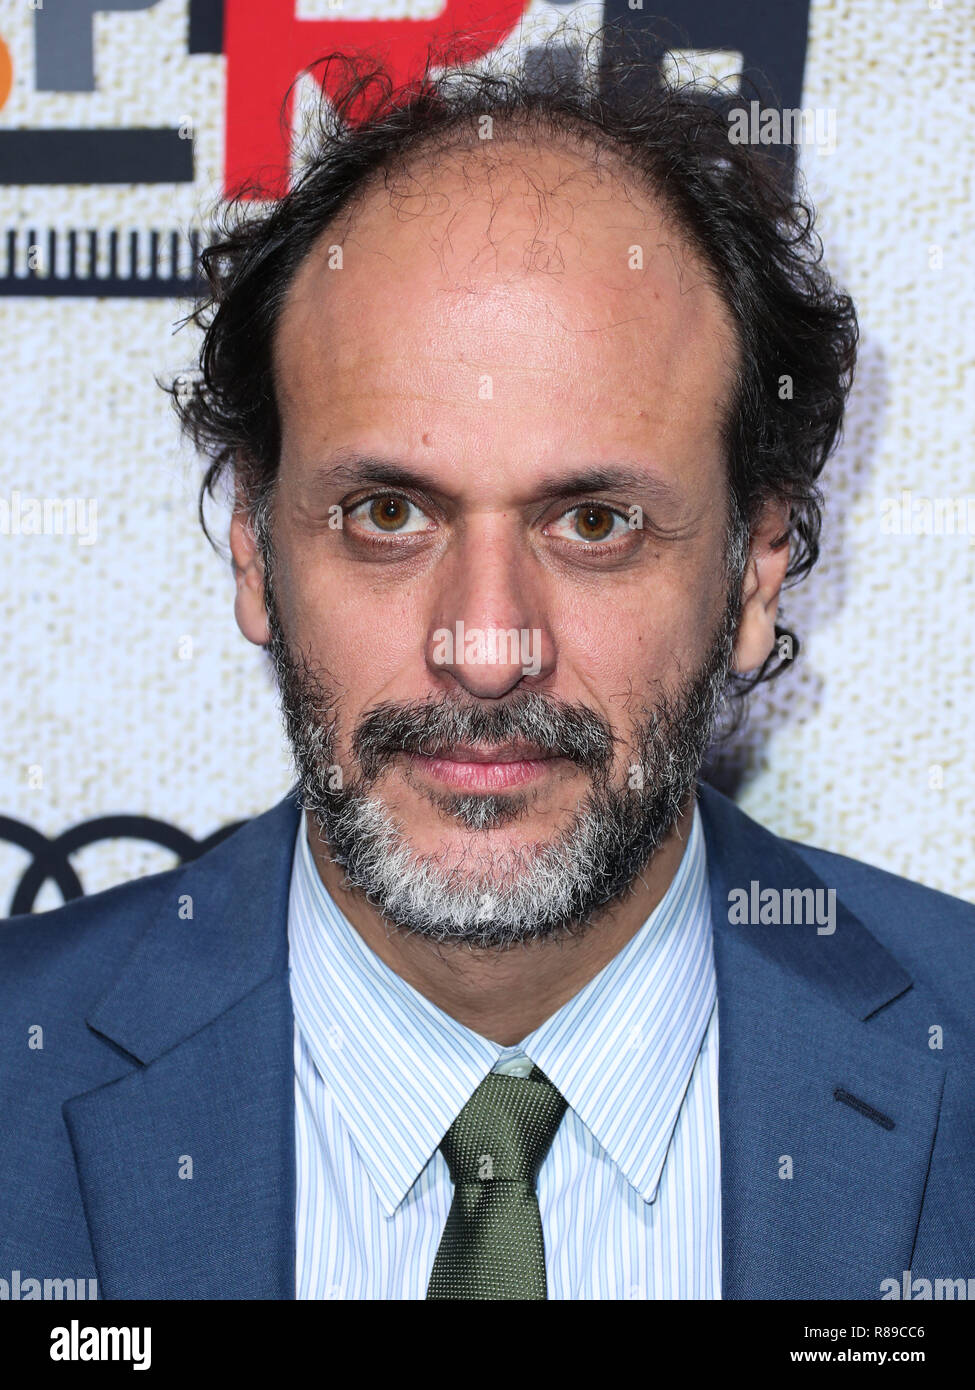 HOLLYWOOD, LOS ANGELES, CA, USA - OCTOBER 24: Director Luca Guadagnino arrives at the Los Angeles Premiere Of Amazon Studio's 'Suspiria' held at the ArcLight Cinerama Dome on October 24, 2018 in Hollywood, Los Angeles, California, United States. (Photo by Xavier Collin/Image Press Agency) Stock Photo